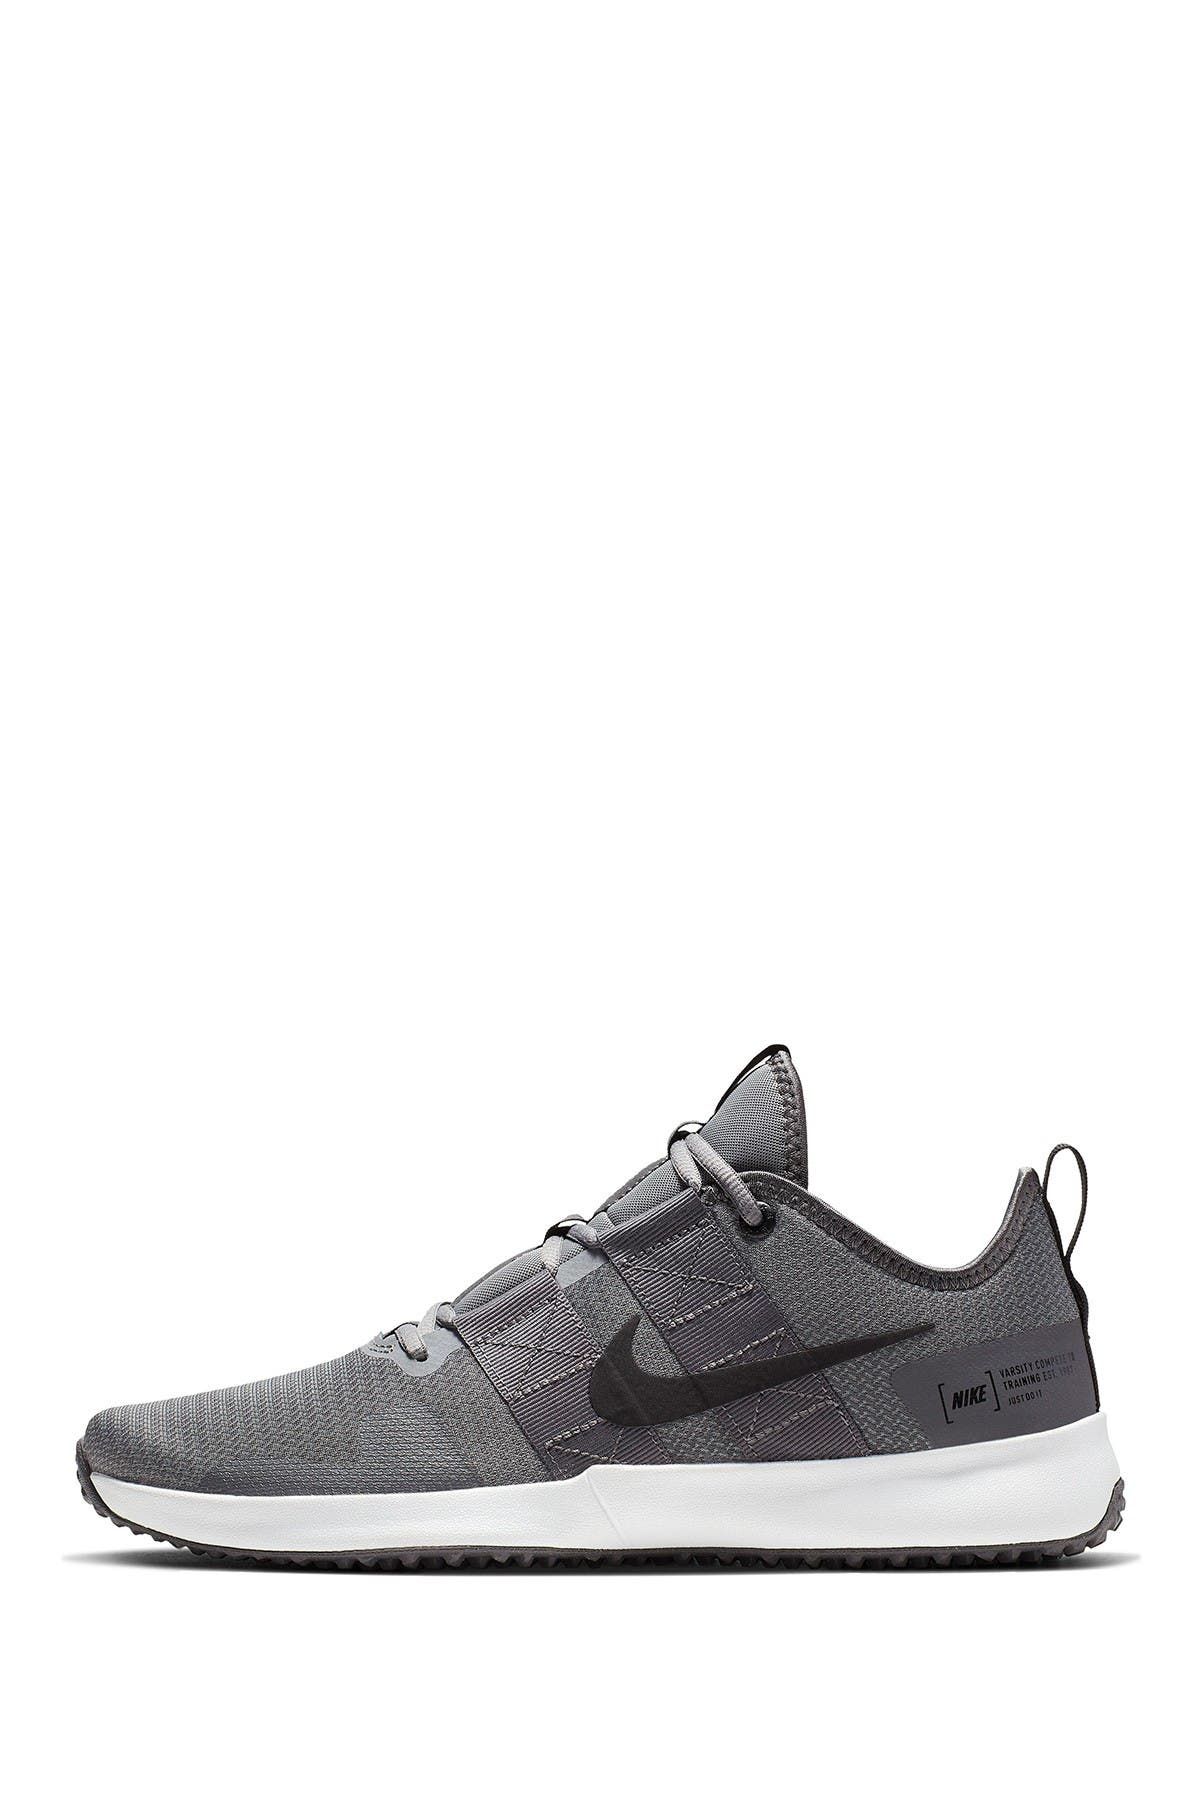 nike varsity compete tr 2 shoes